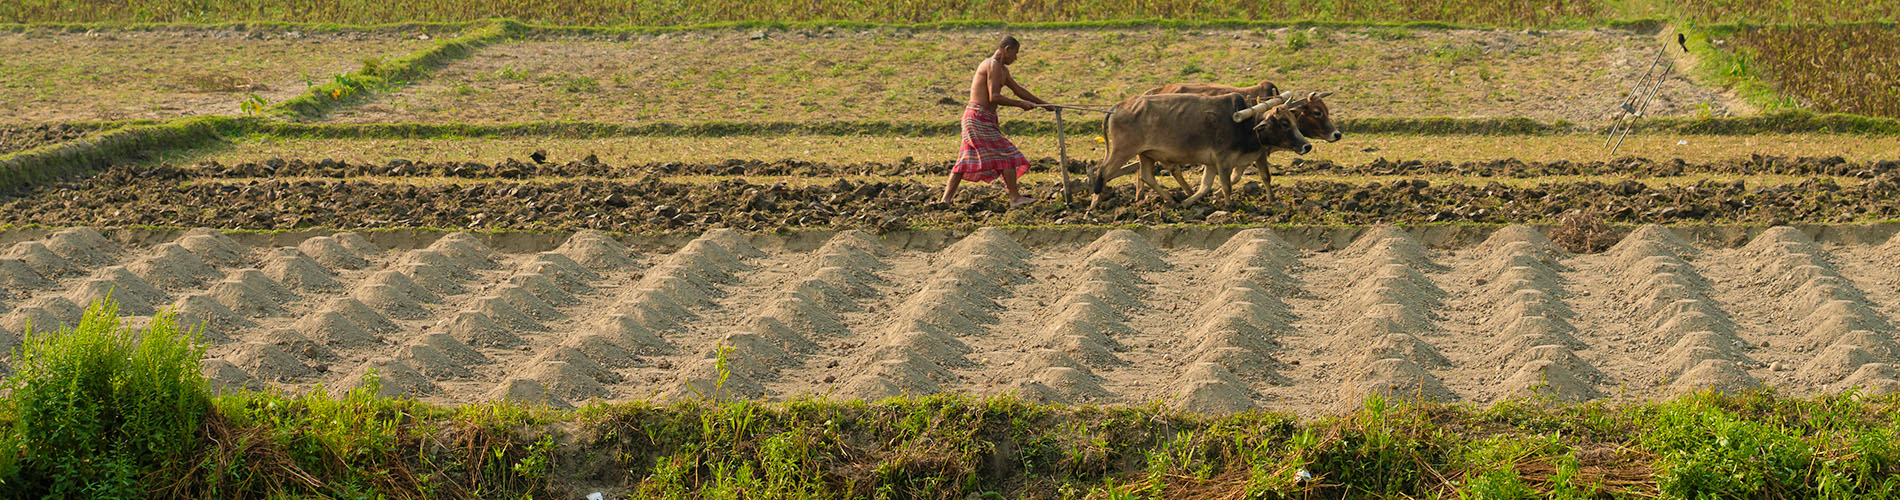 a man ploughing a field with live animals